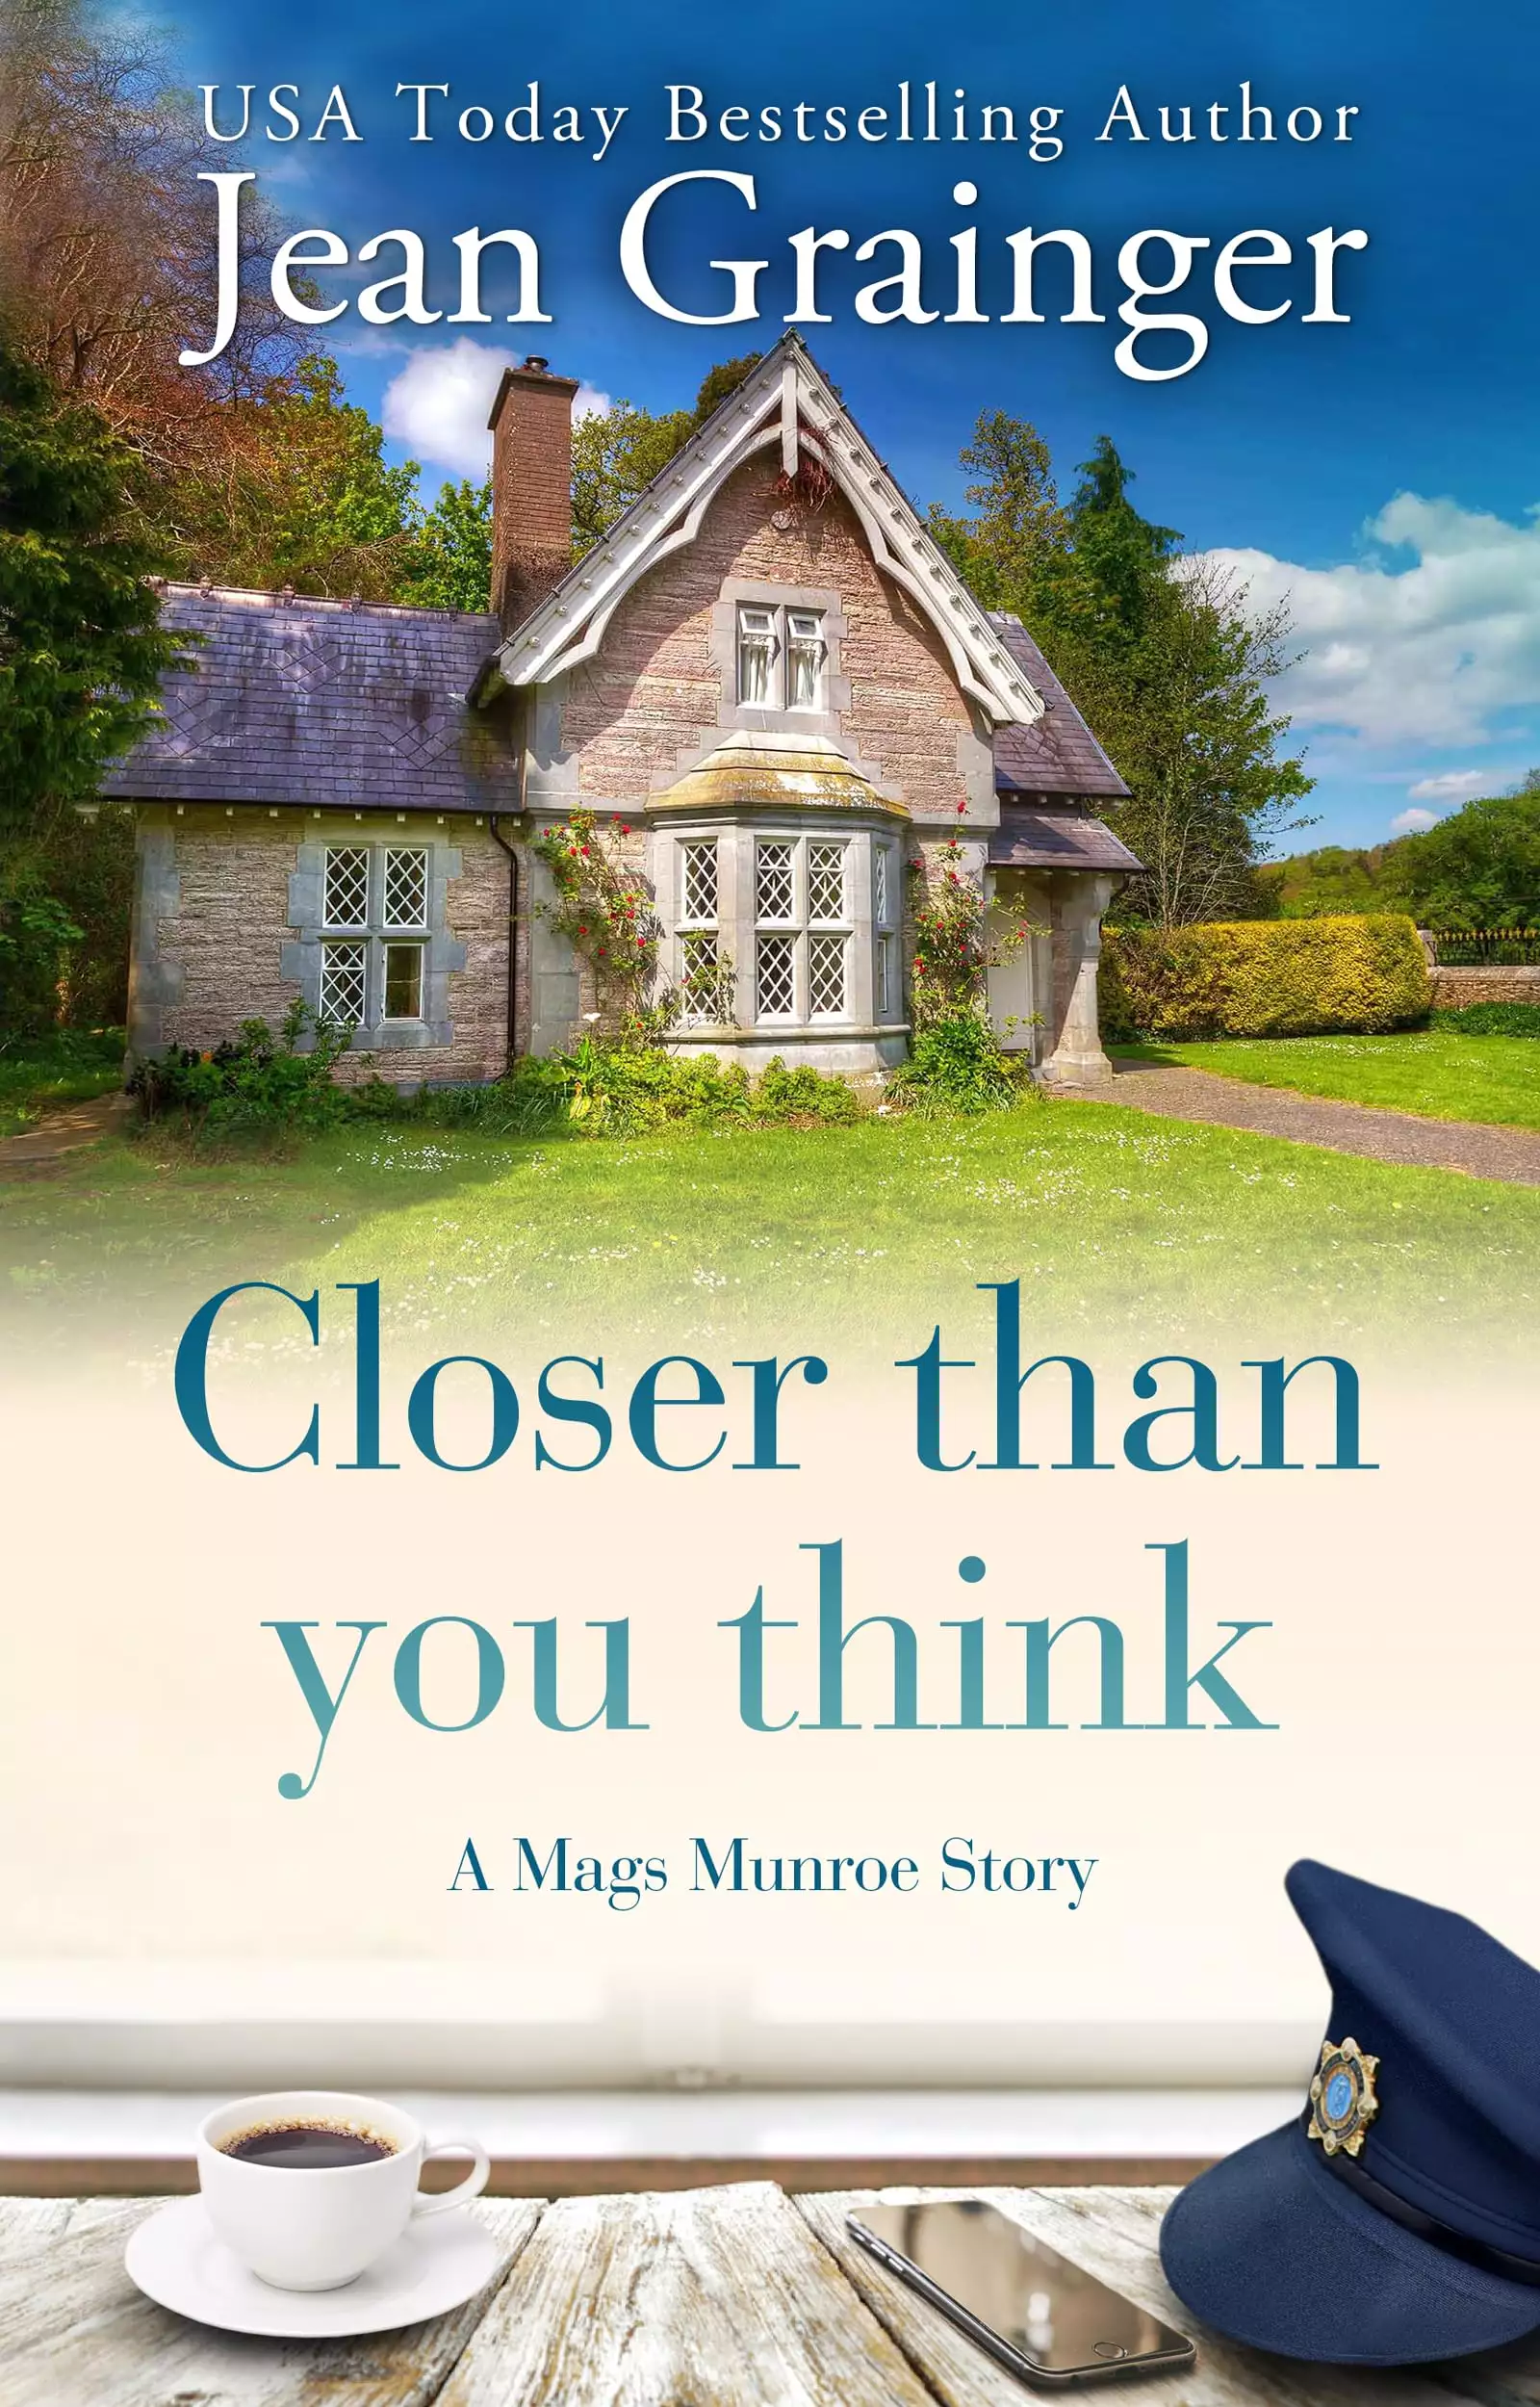 Closer than you think: A Mags Munroe Story